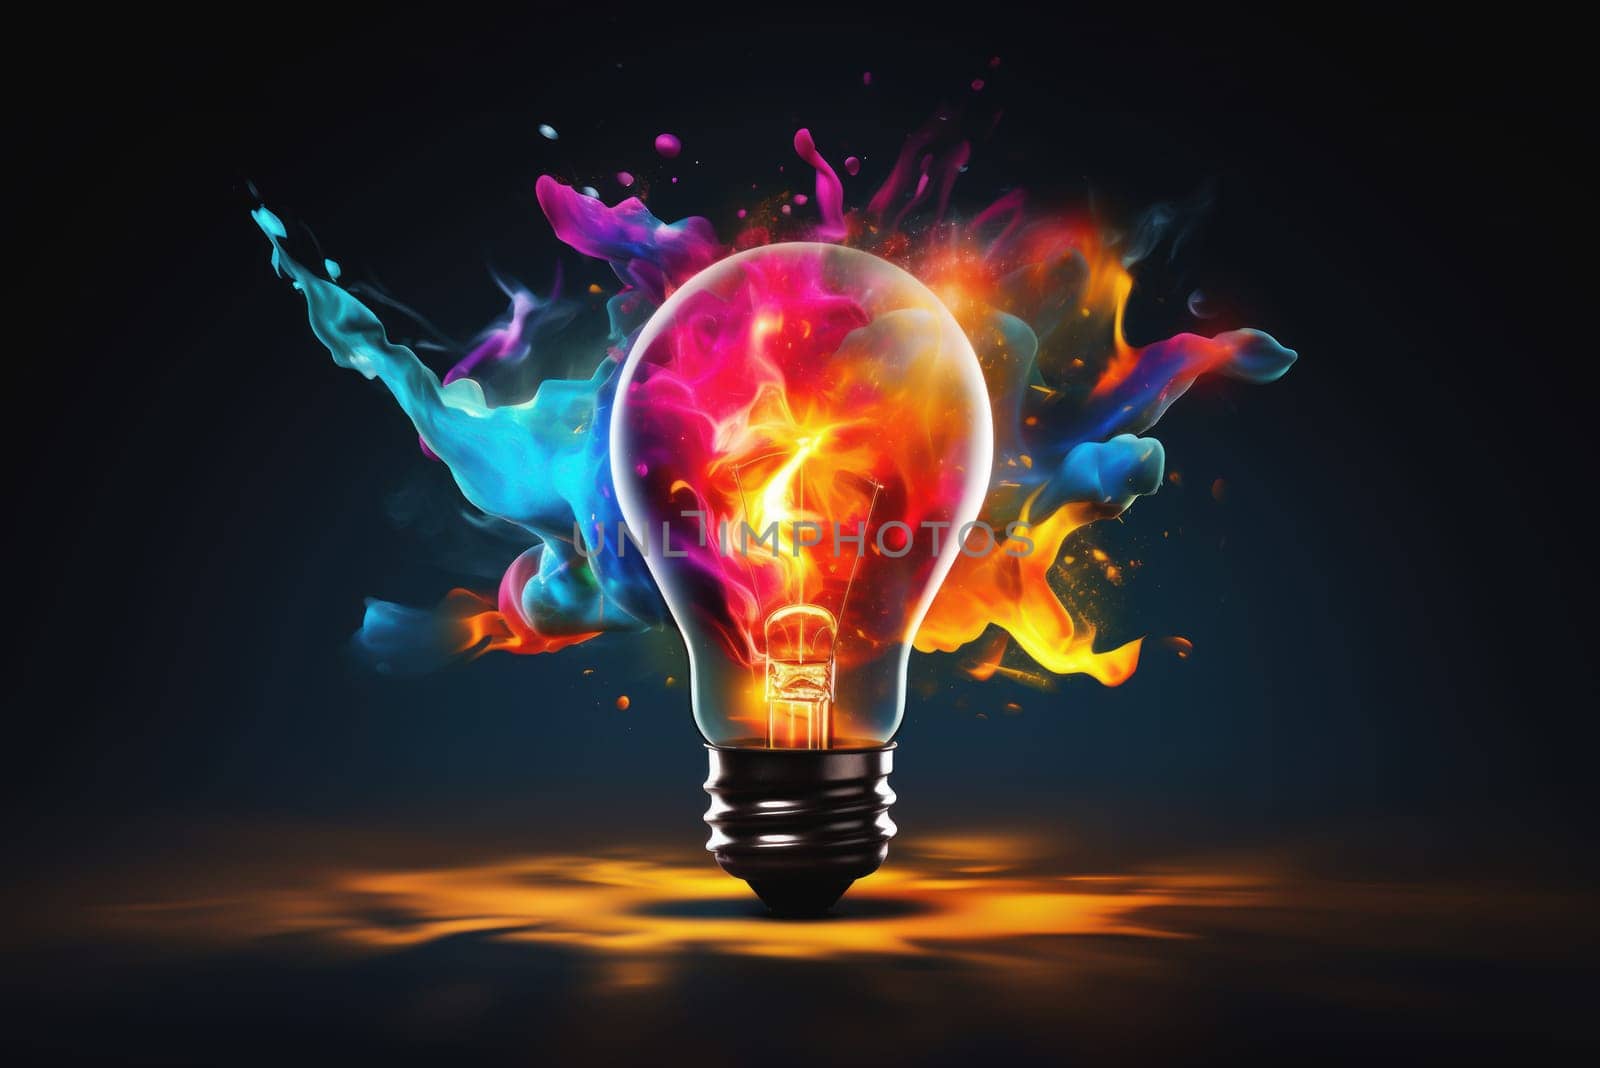 Light bulb in the dark with colorful explosions by simpson33